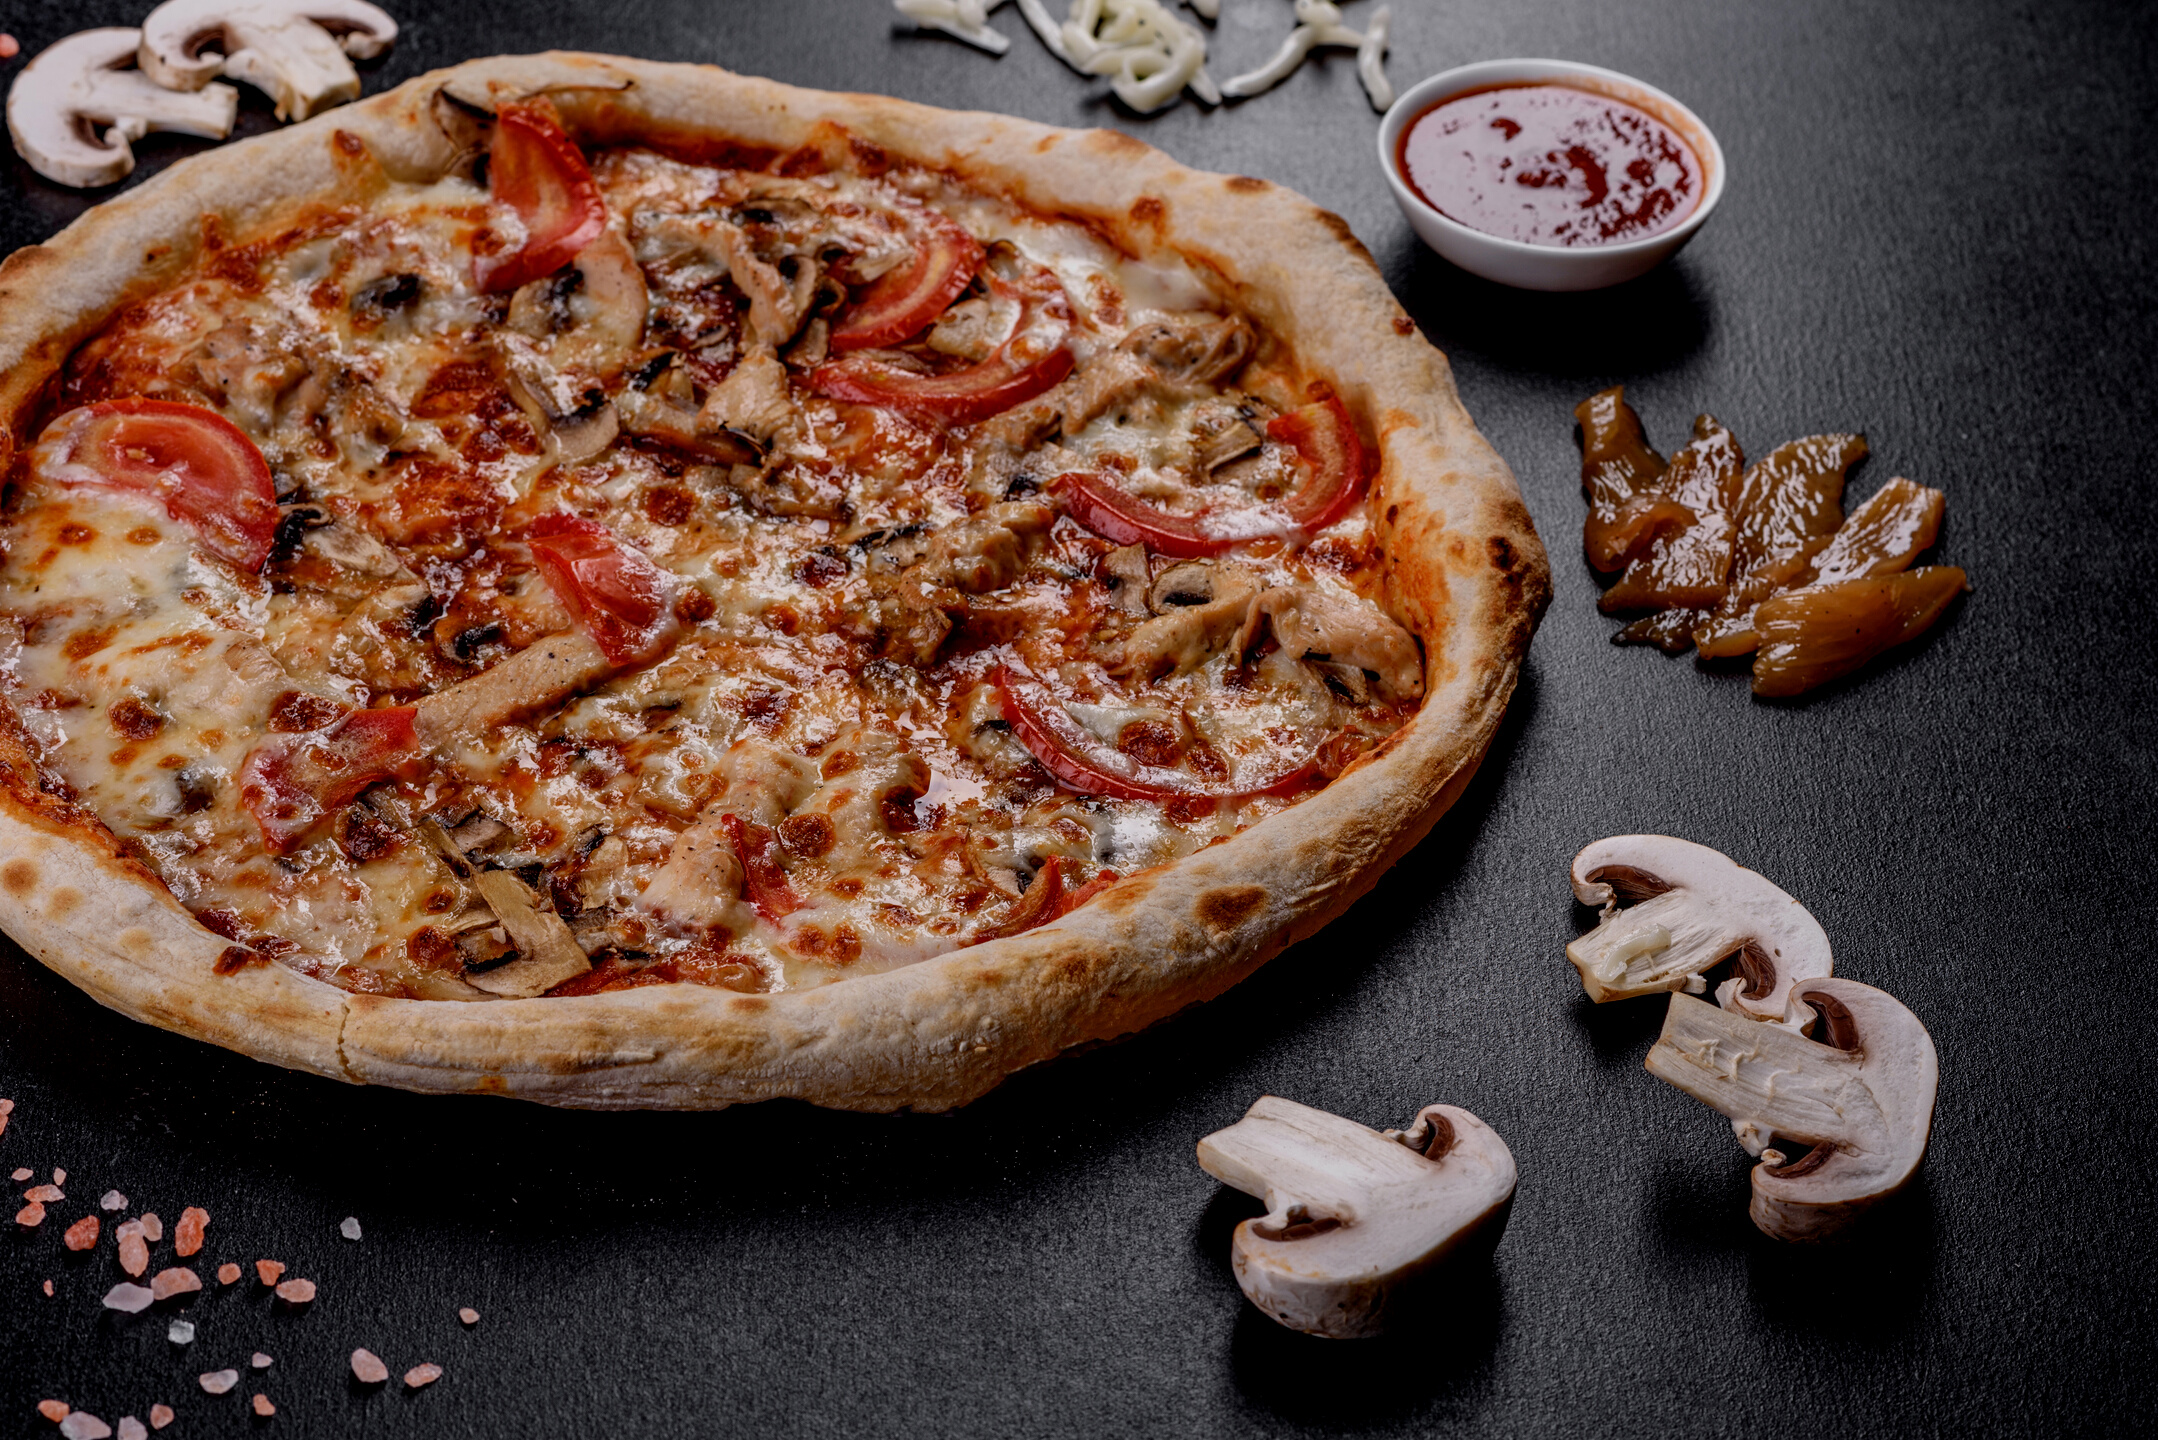 Fresh Delicious Italian Pizza with Mushrooms and Tomatoes on a Dark Concrete Background